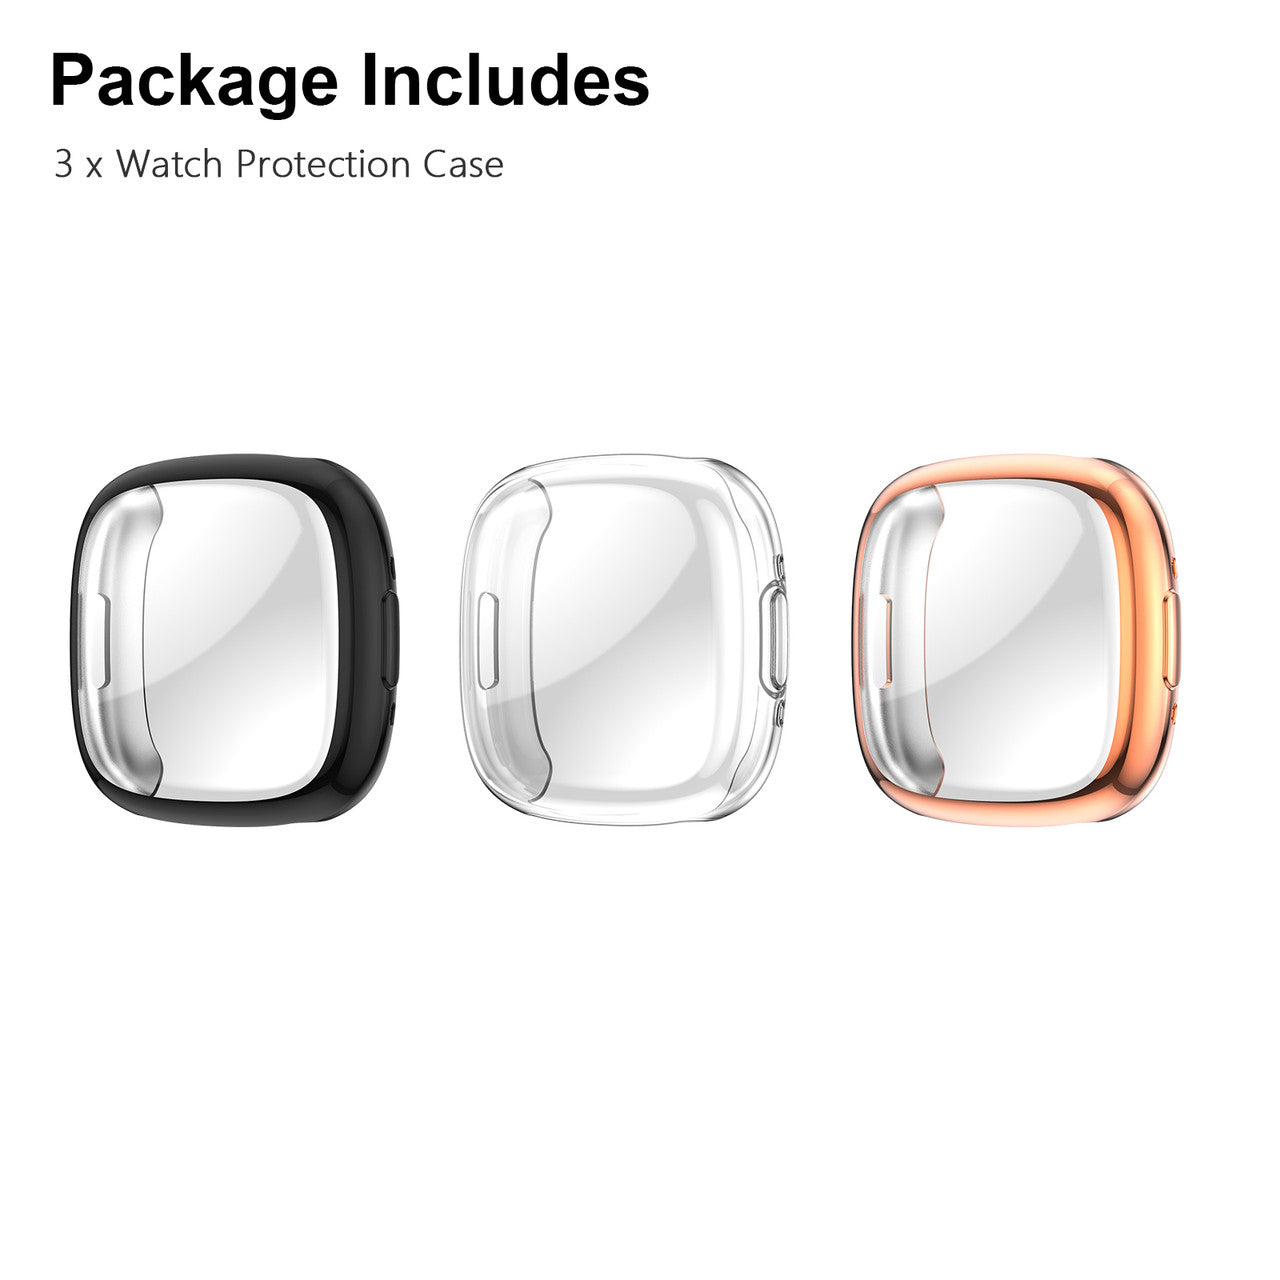 3 Packs TPU Screen Protector Case for Fitbit - Soft Tpu Plated Bumper Shell All-around Full Cover Protective Cases for Sense 2 / Versa 4 Smartwatch, Fitbit Accessory  (Gold, Black, Clear)